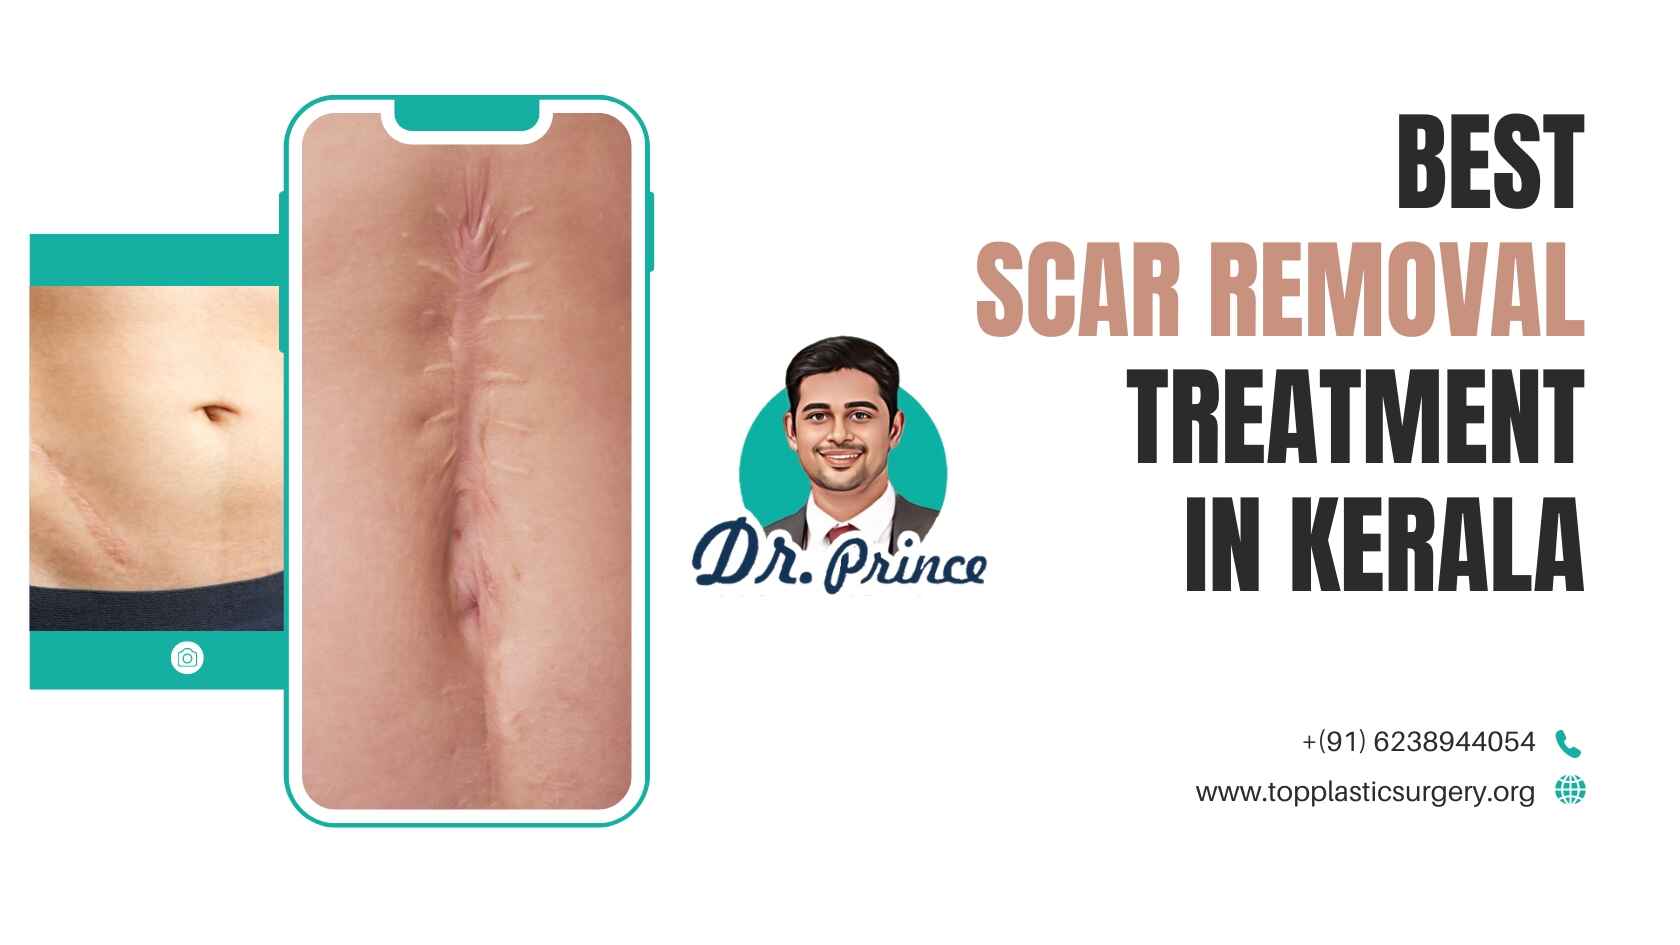 Dr. Prince performing a scar removal treatment in Kerala.